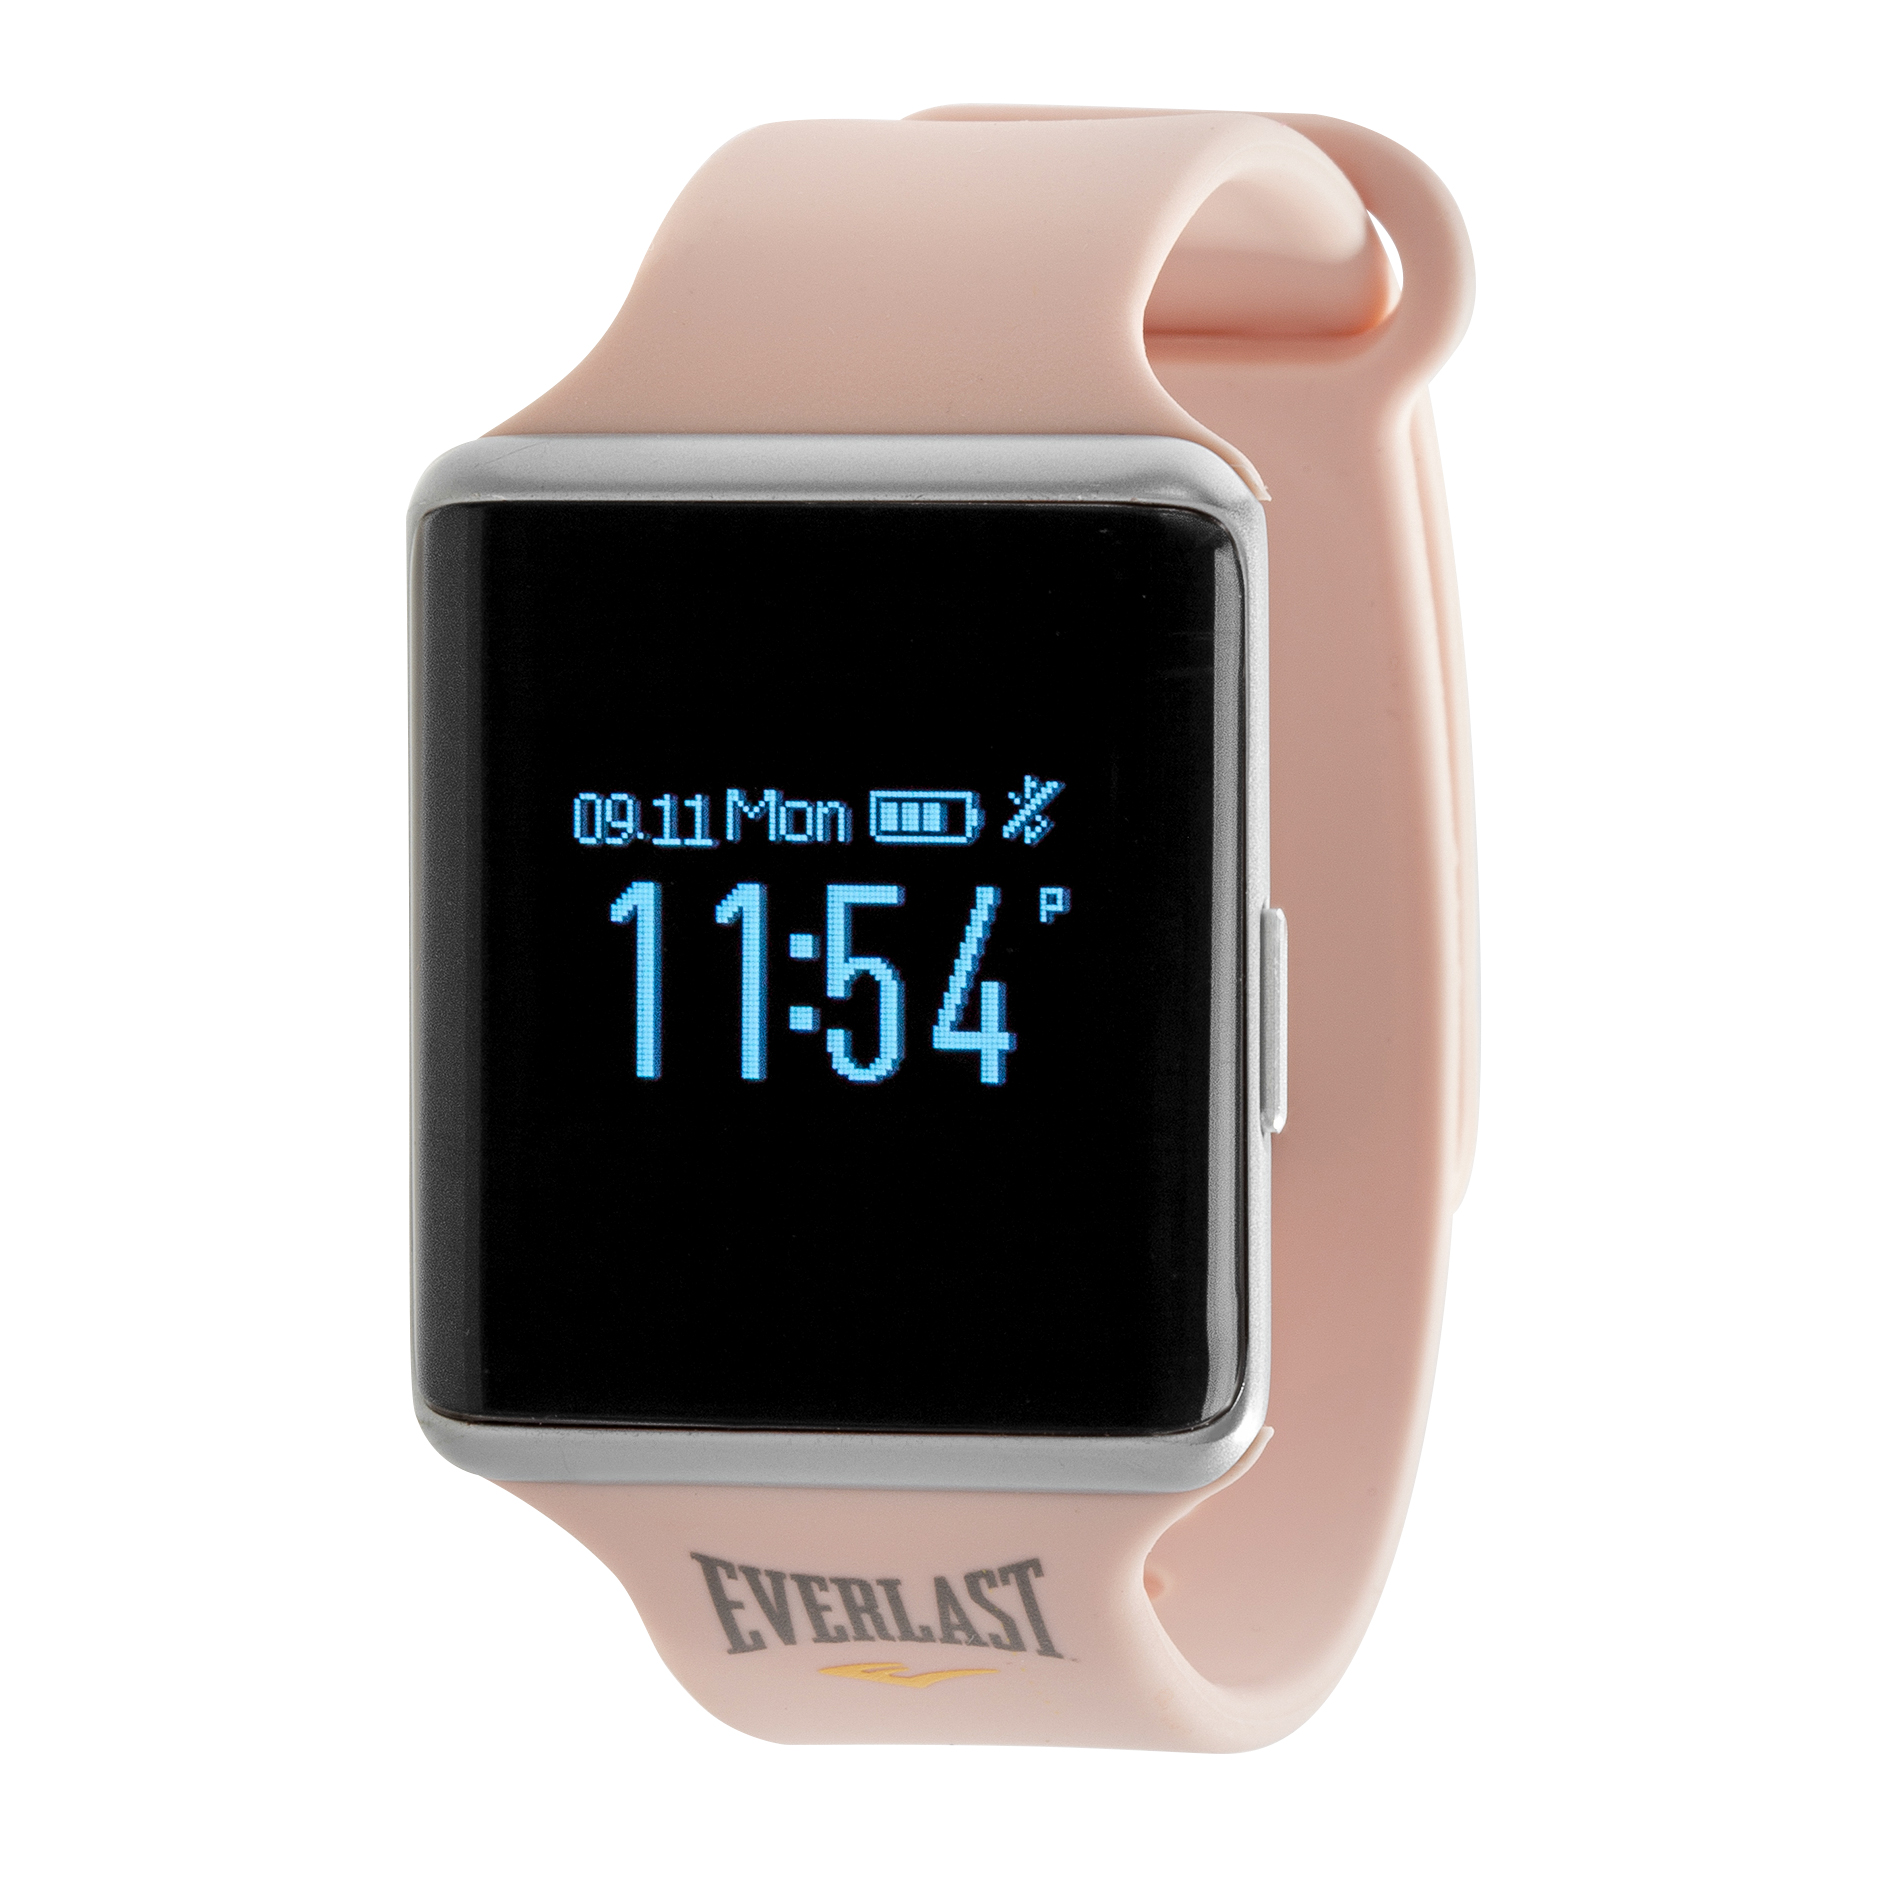 Everlast TR10 Blood Pressure and Heart Rate Monitor Activity Tracker; Includes Caller ID and Message Previews - image 1 of 6